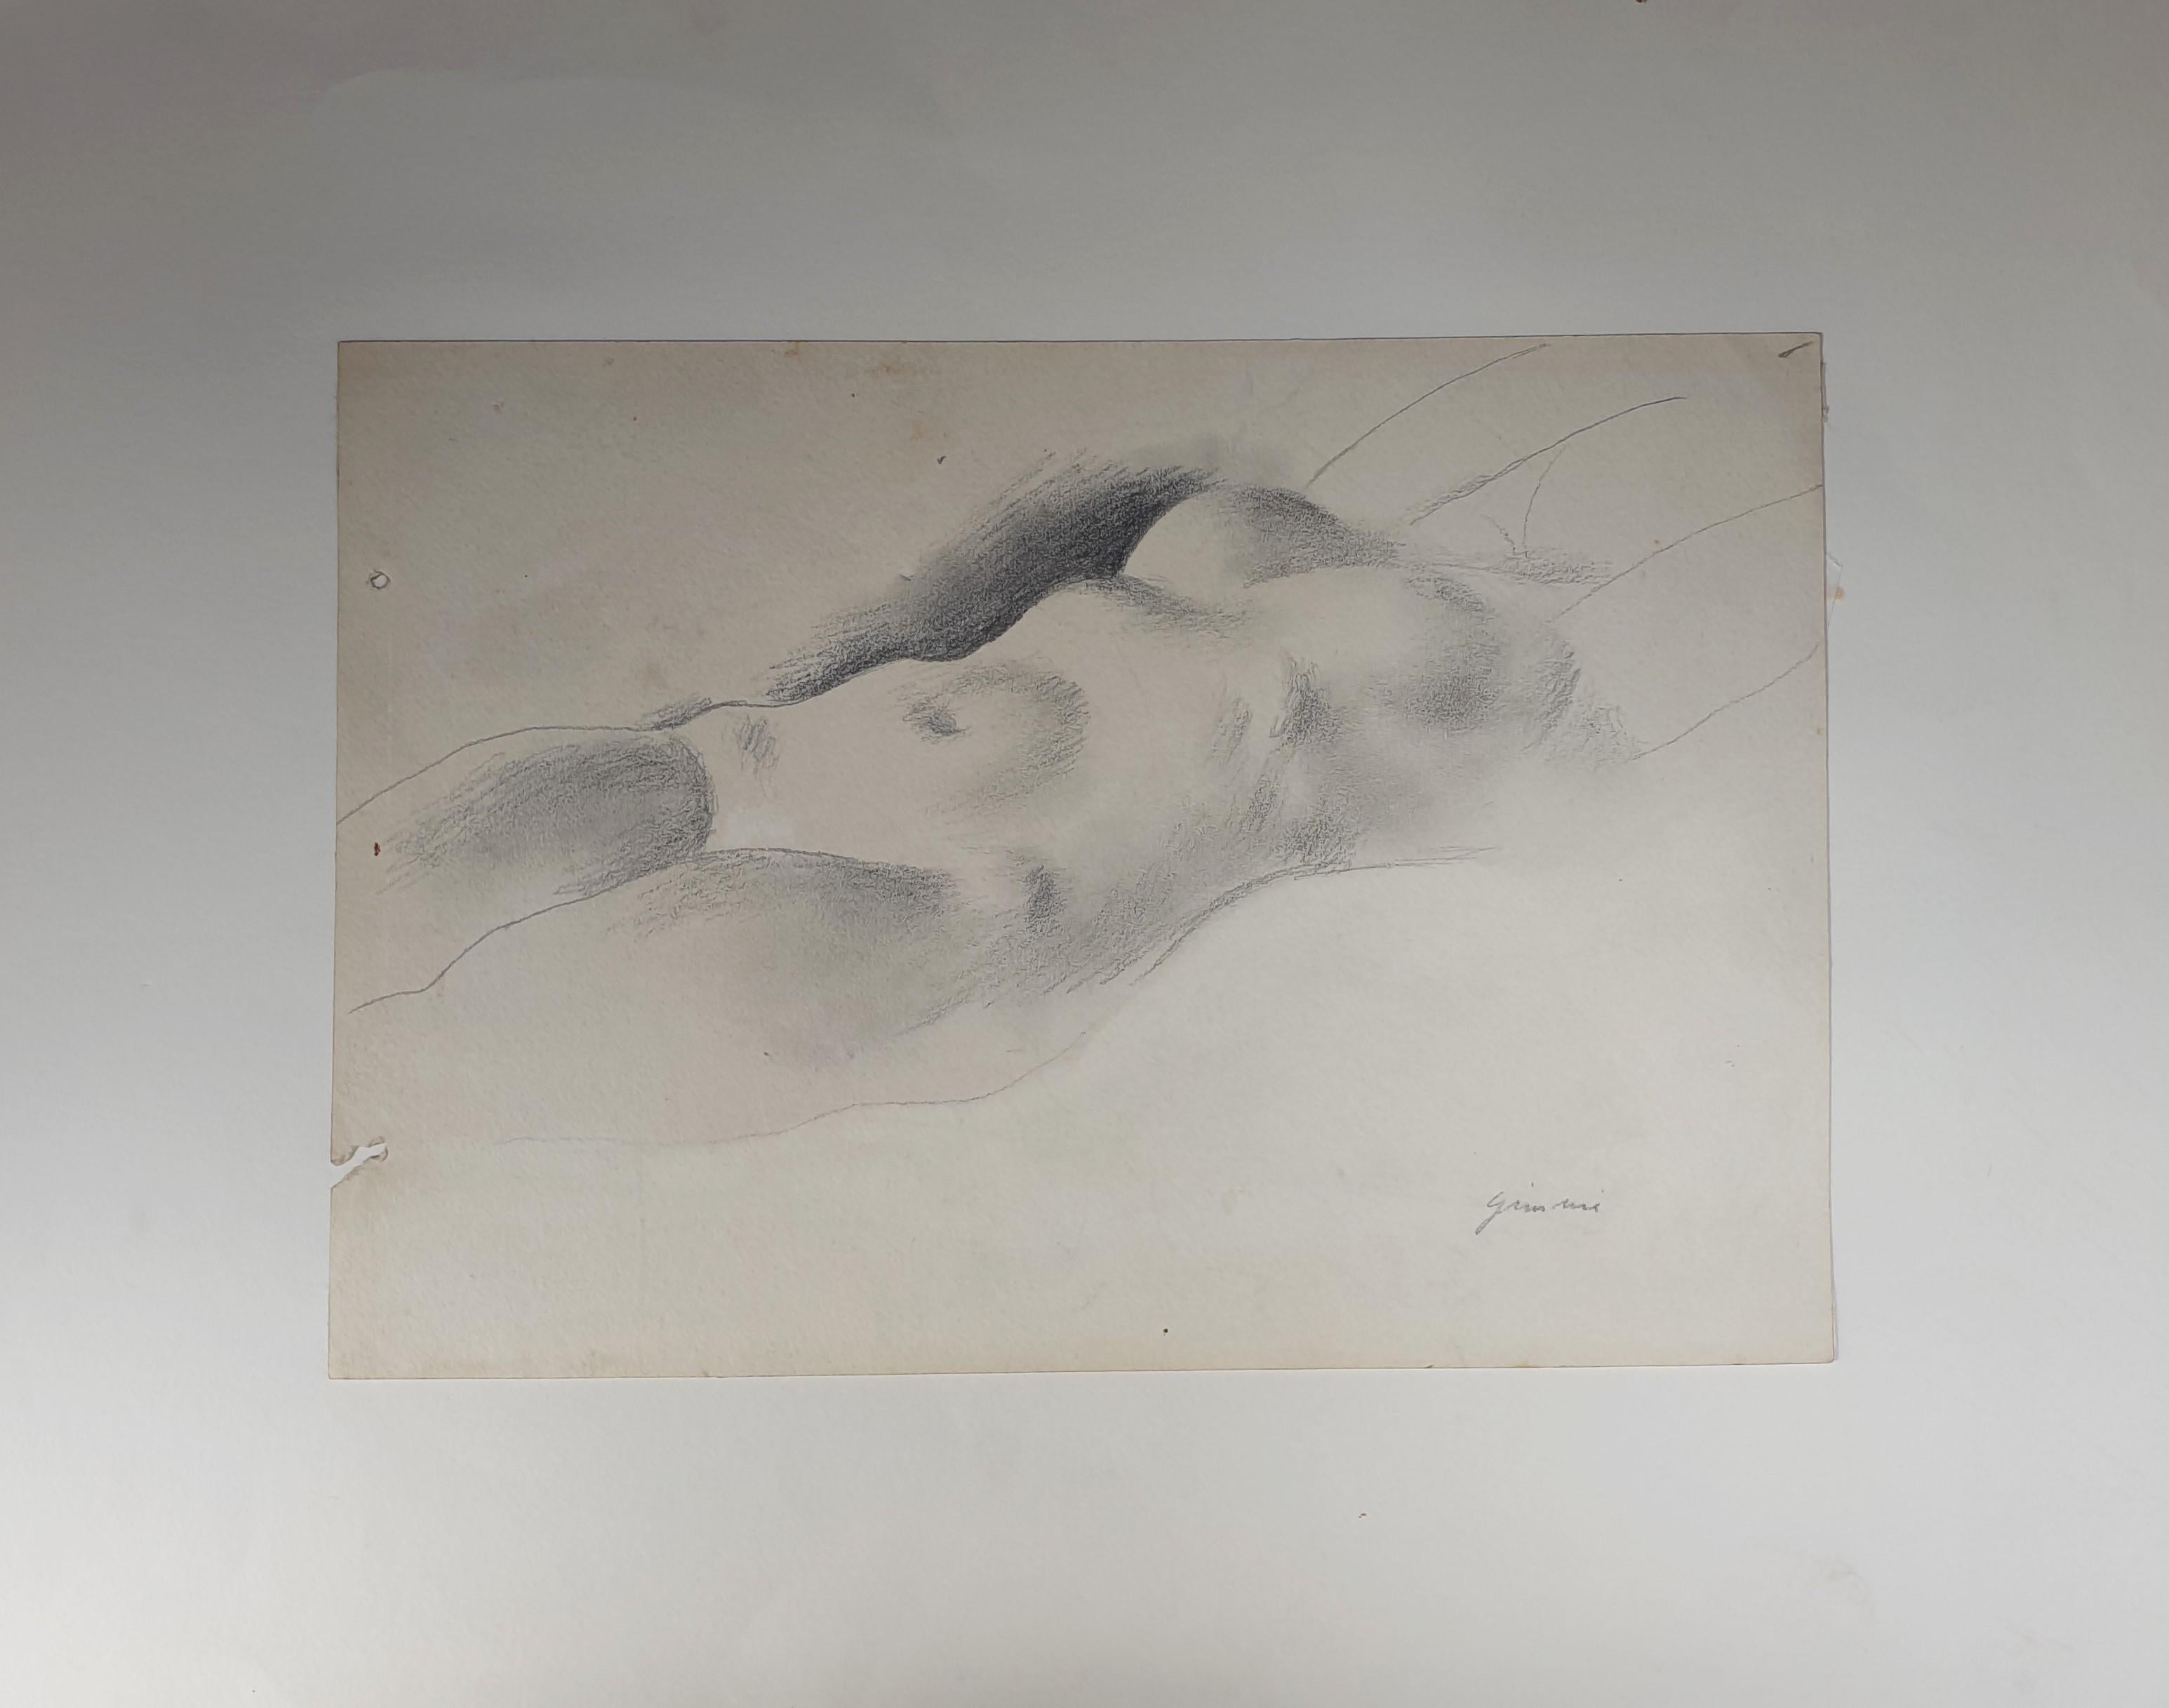 Wilhelm GIMMI Zurich, 1886 - Chextres, 1965 Pencil drawing 18 x 25.5 cm Signed lower in dropite 